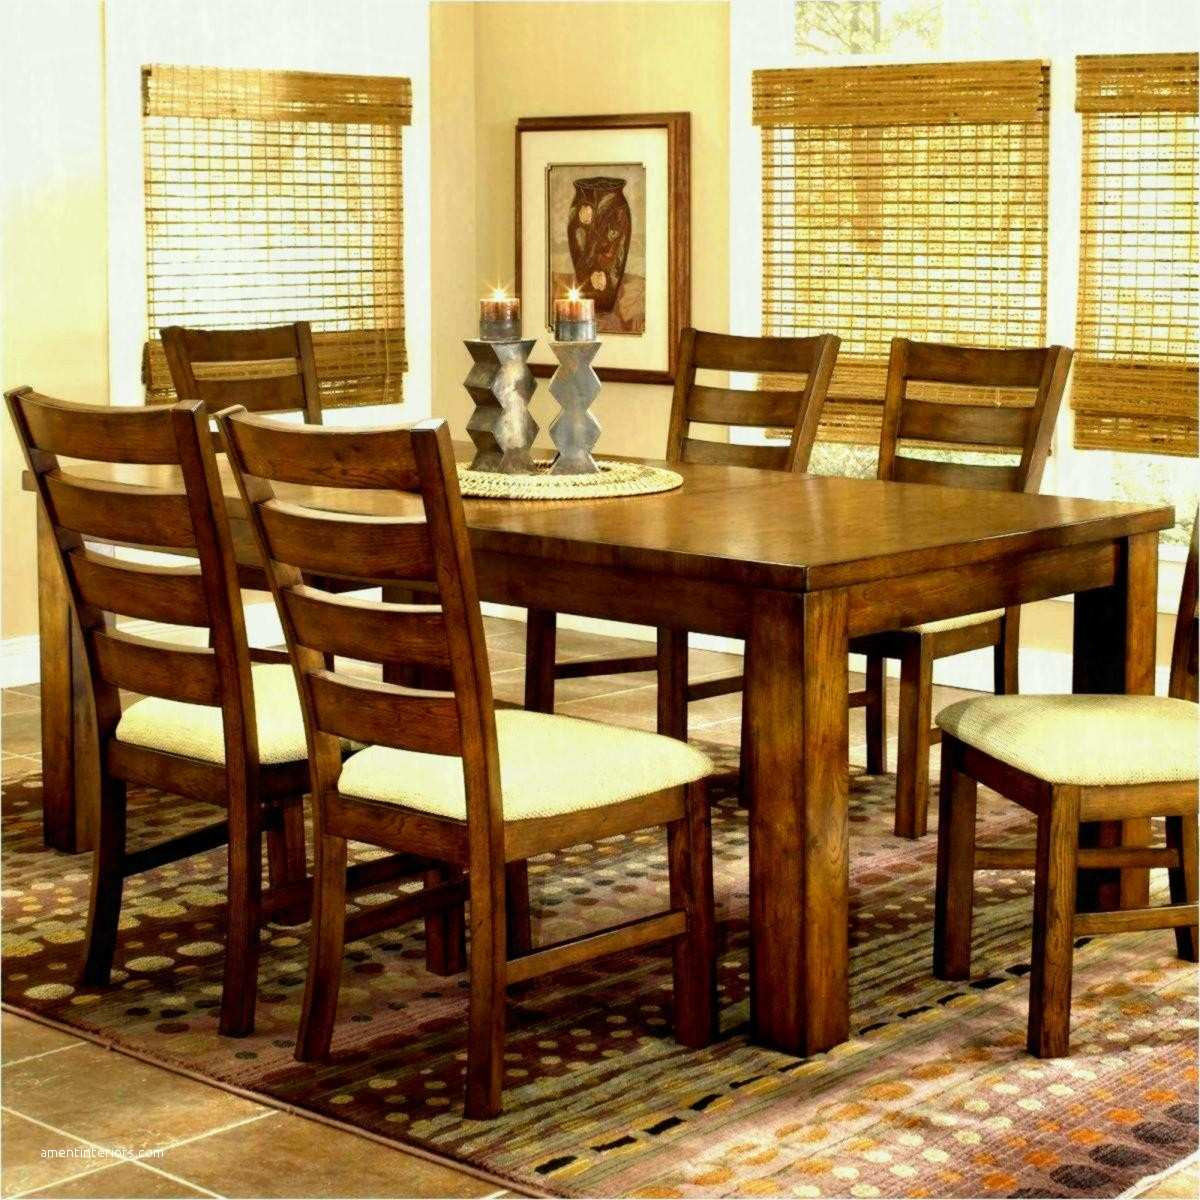 14 Awesome Hardwood Floor Table top 2024 free download hardwood floor table top of cheap and reviews modern wood dining table design styling up your inside cheap and reviews modern wood dining table design styling up your real wood dining table 